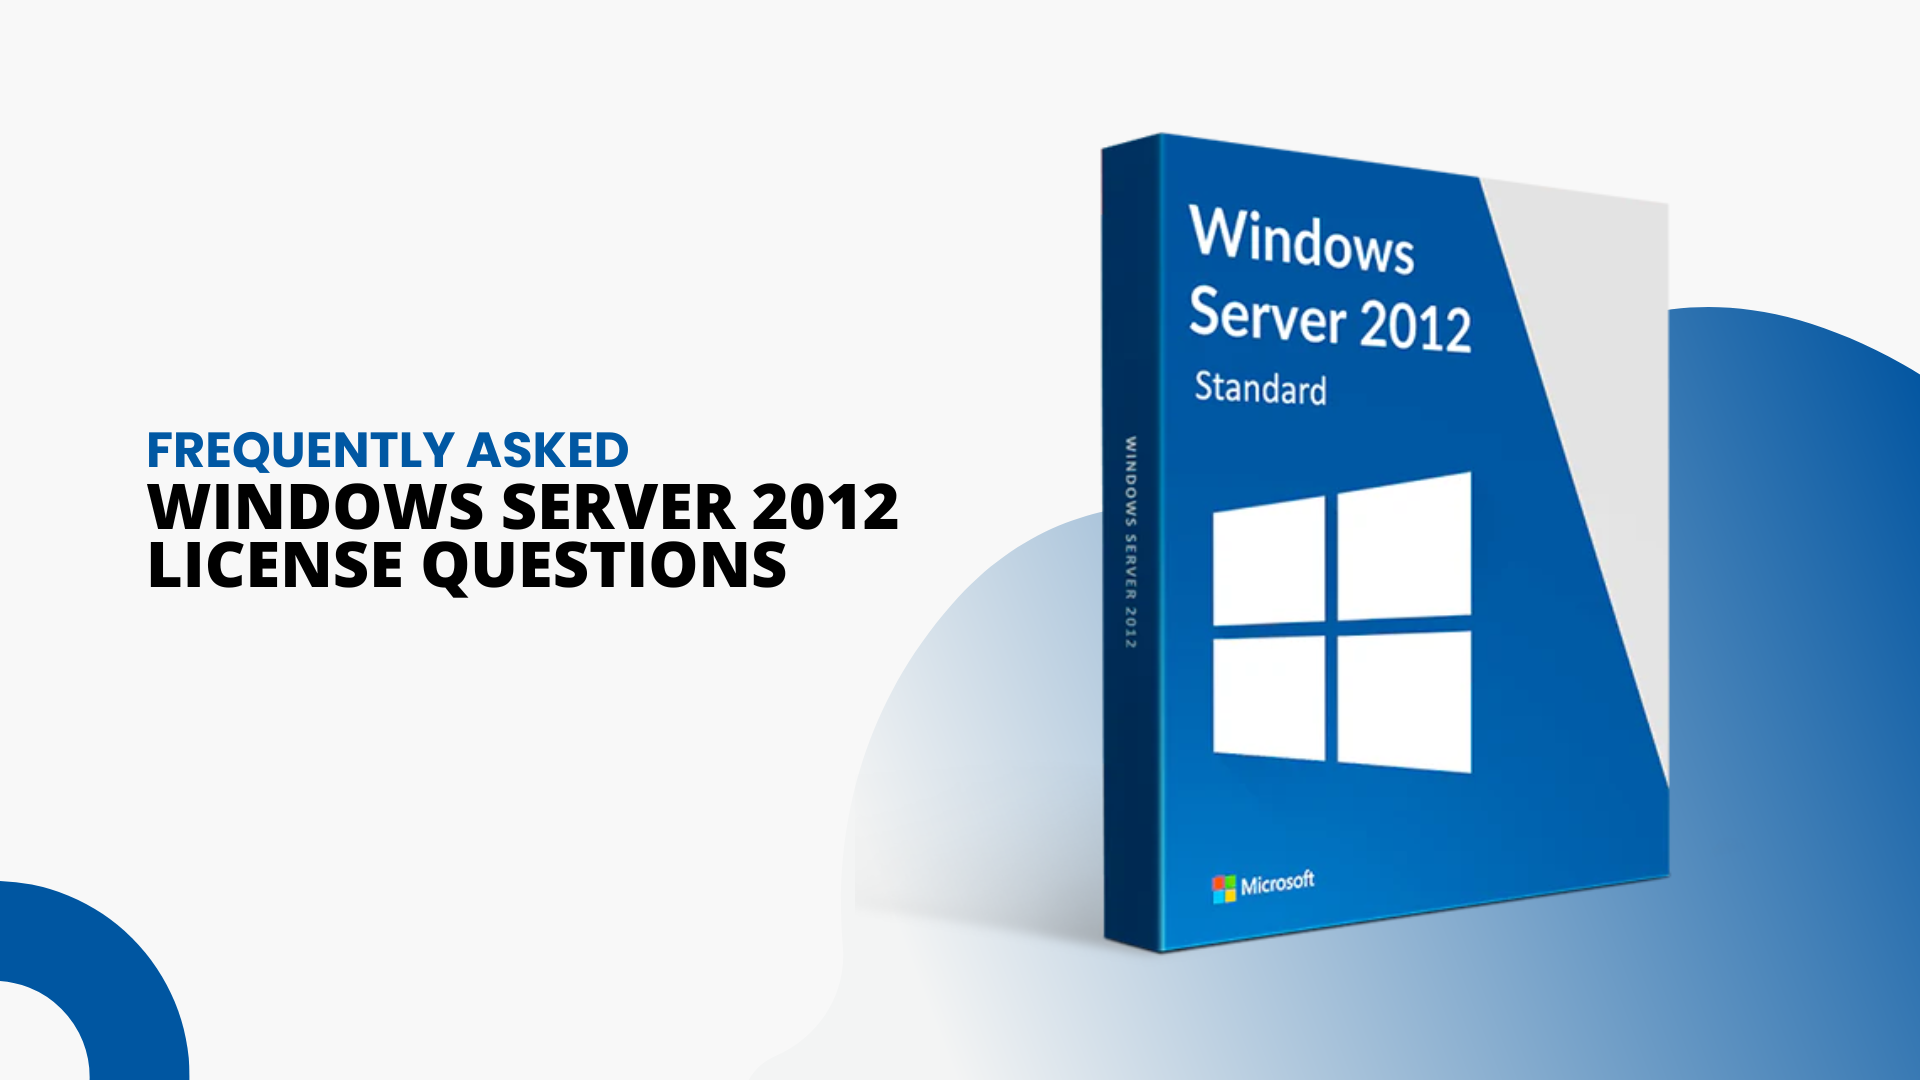 FAQs about Windows Server 2012 Licensing